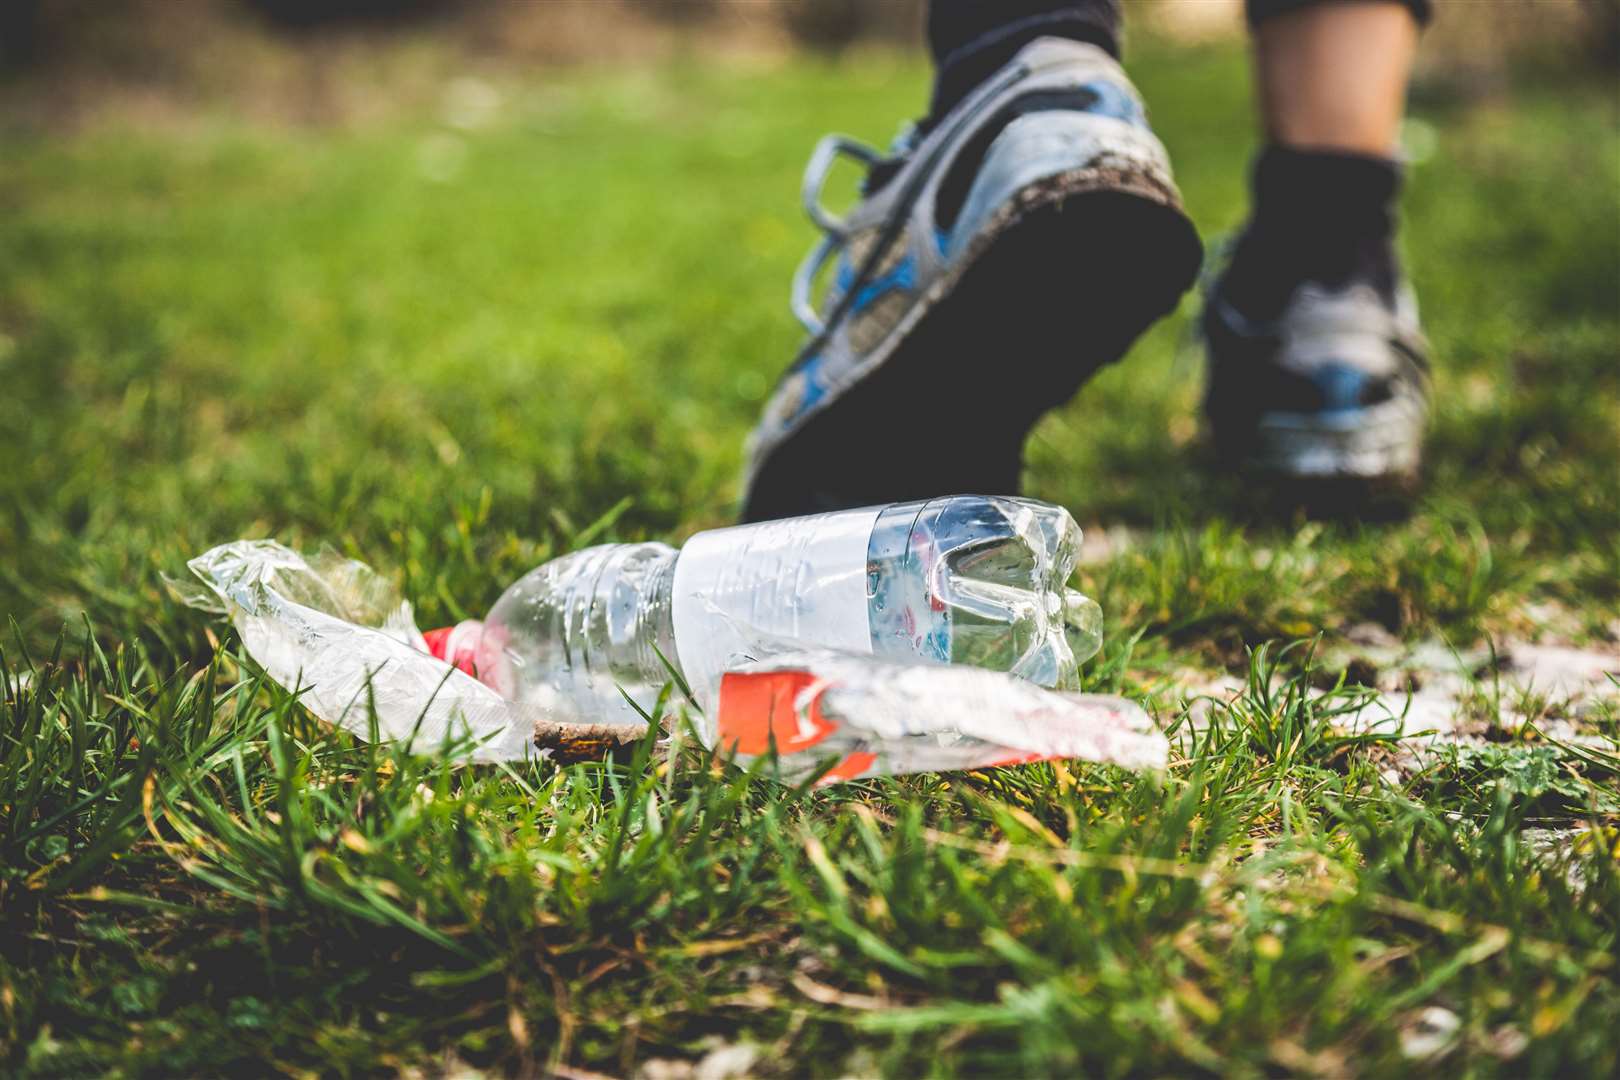 Councils are being encouraged to do more to tackle litter generated by new businesses opening. Image: Stock photo.